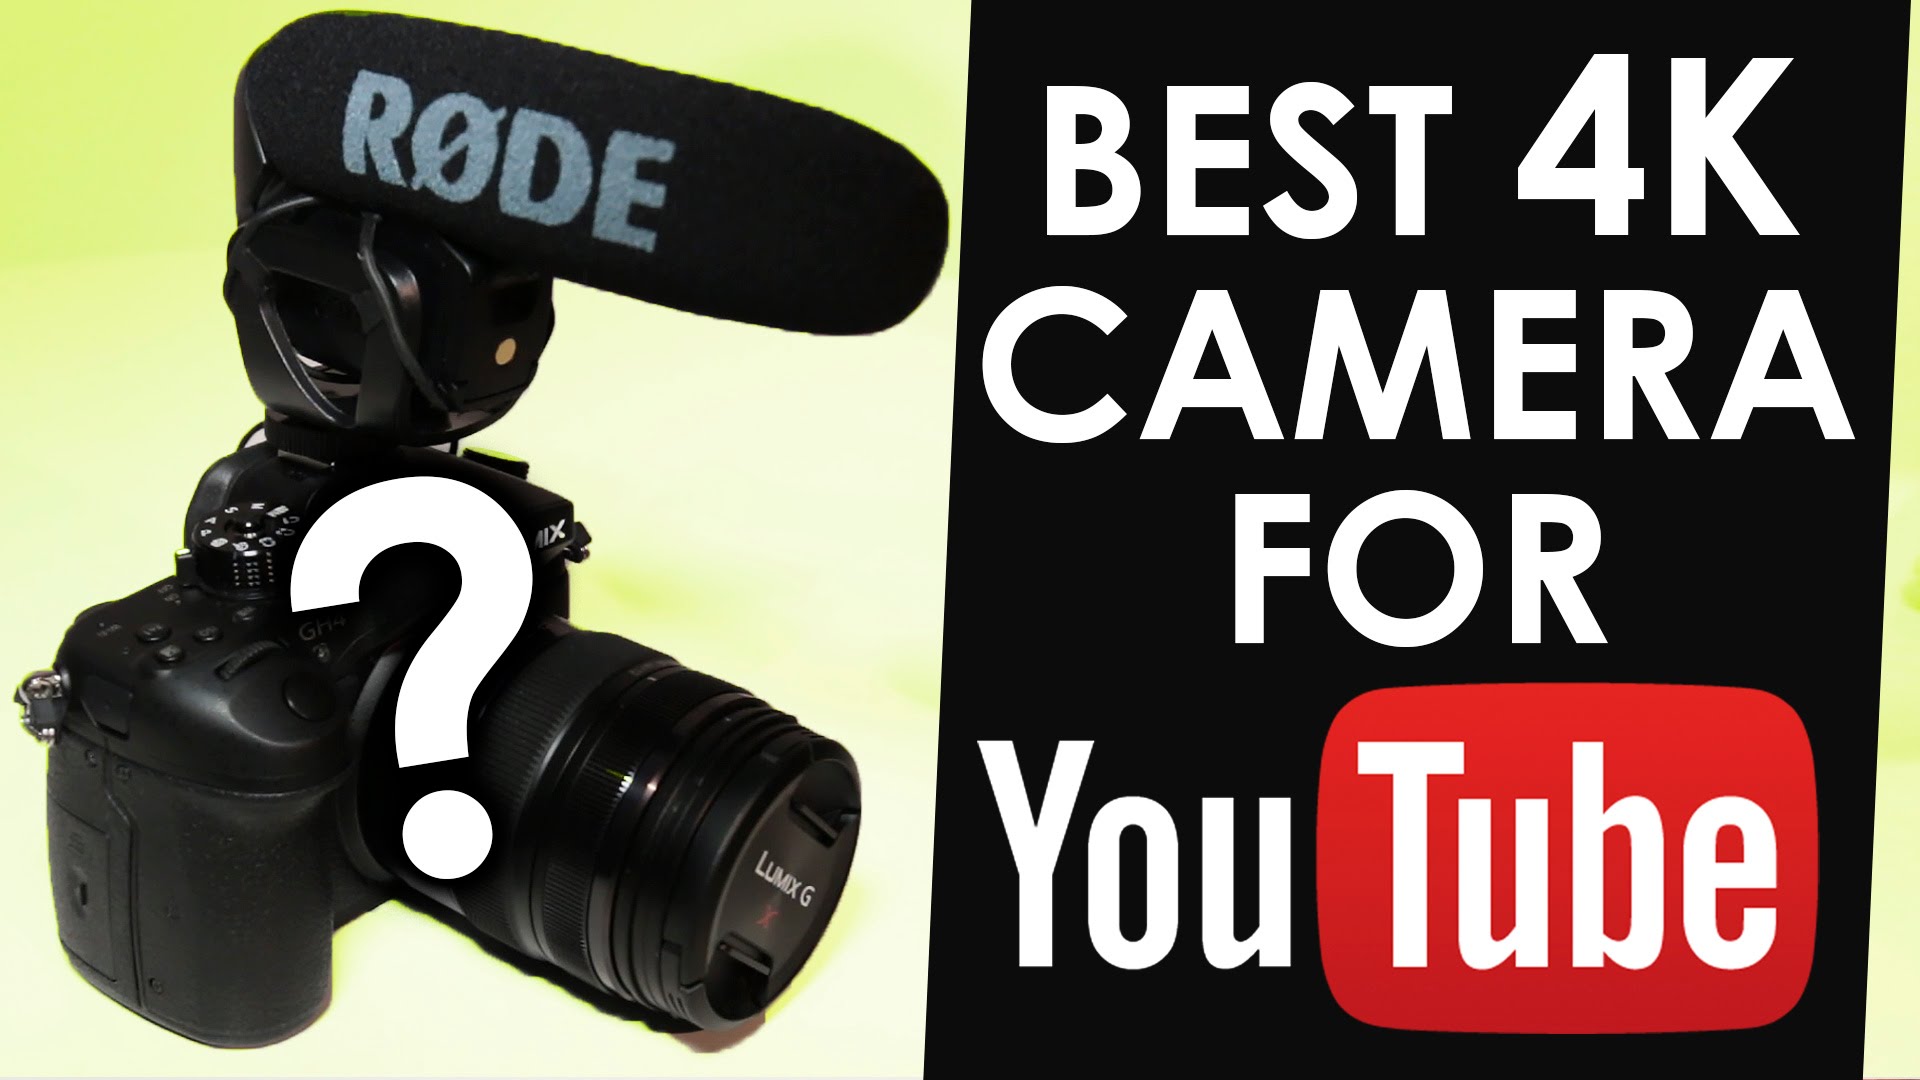 Best 4k Camera For YouTube? — Panasonic GH4 Review with Bryan Elliott